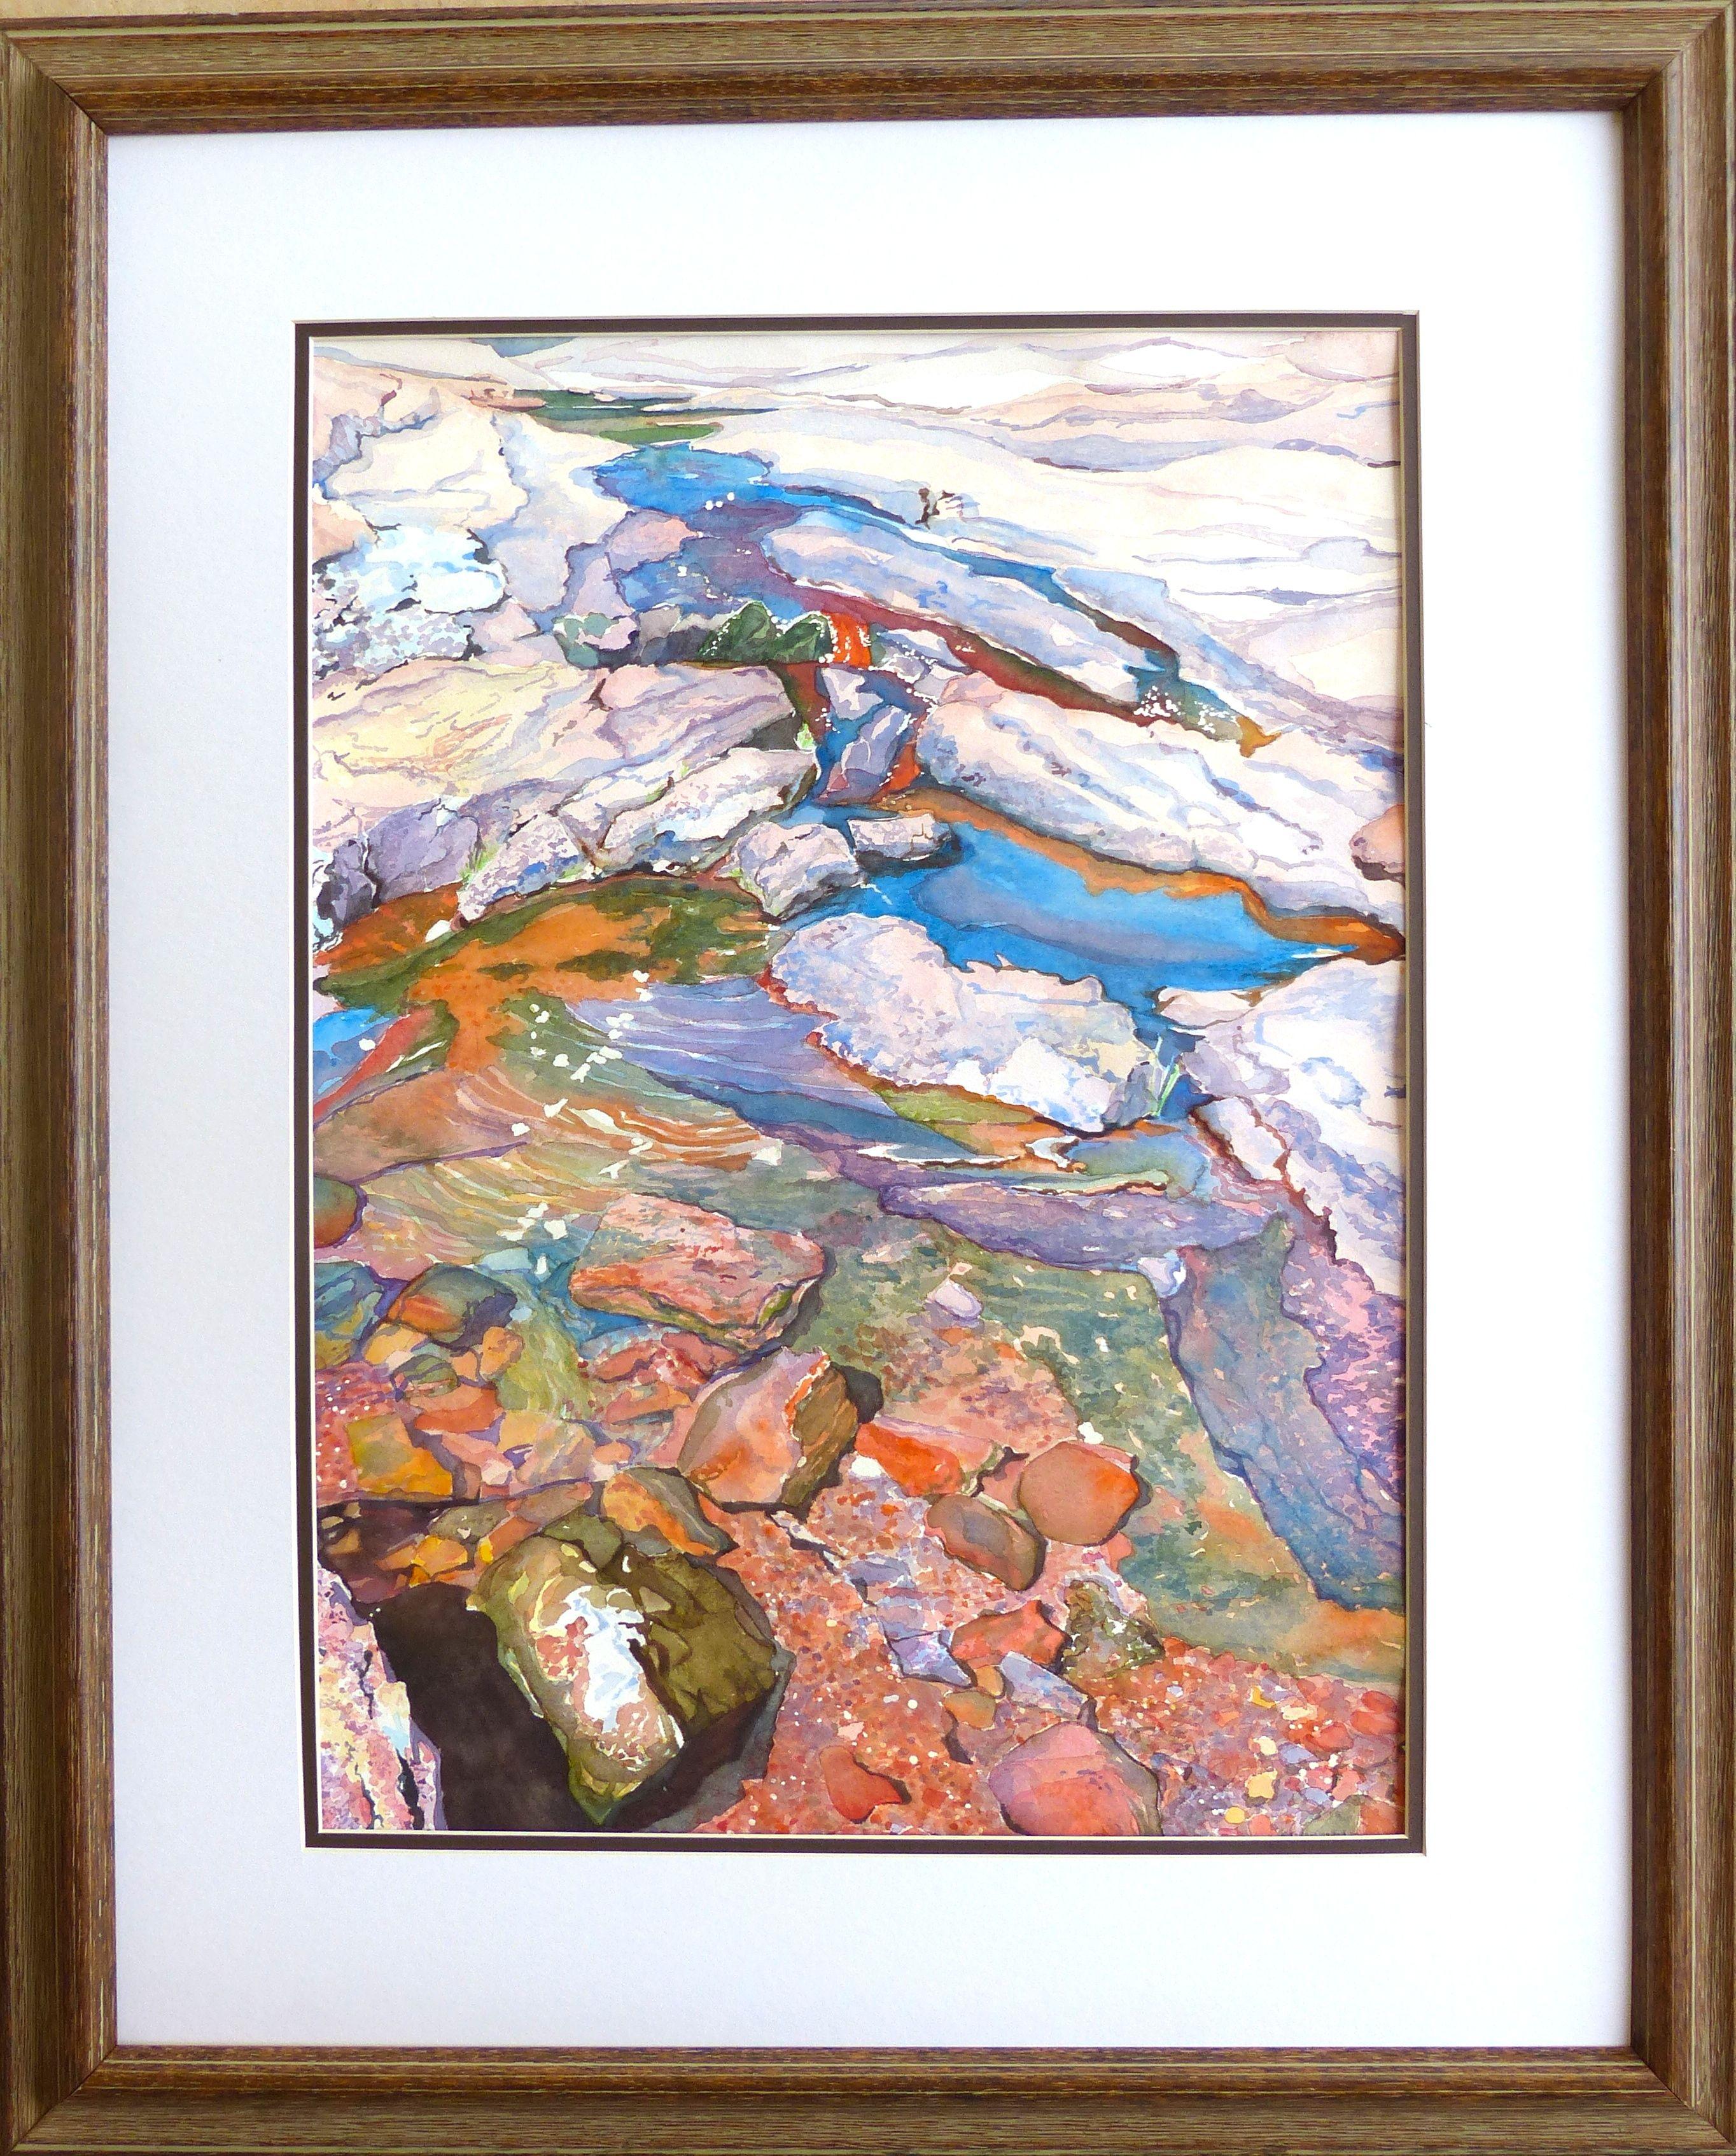 Stream at Enchanted Rock, Painting, Watercolor on Watercolor Paper - Realist Art by Leslie White